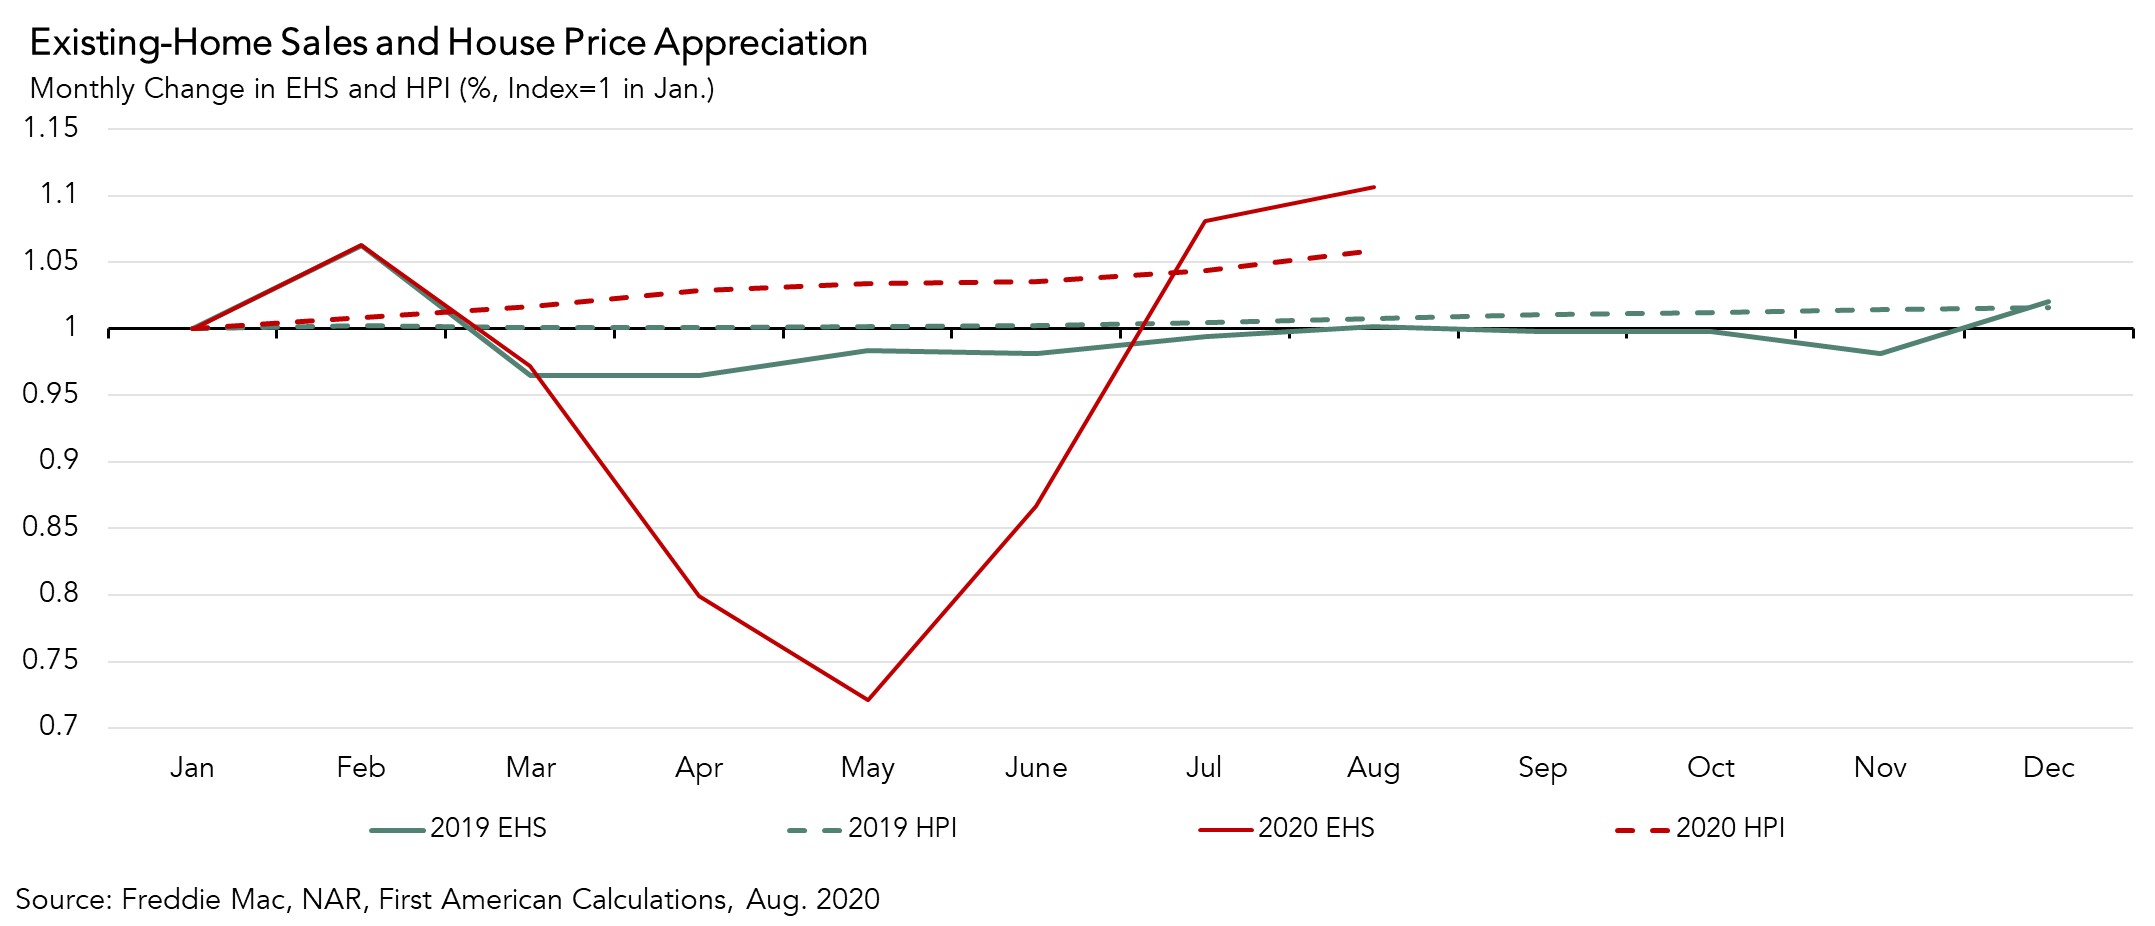 Existing-Home Sales and House Price Appreciation Graph Aug. 2020